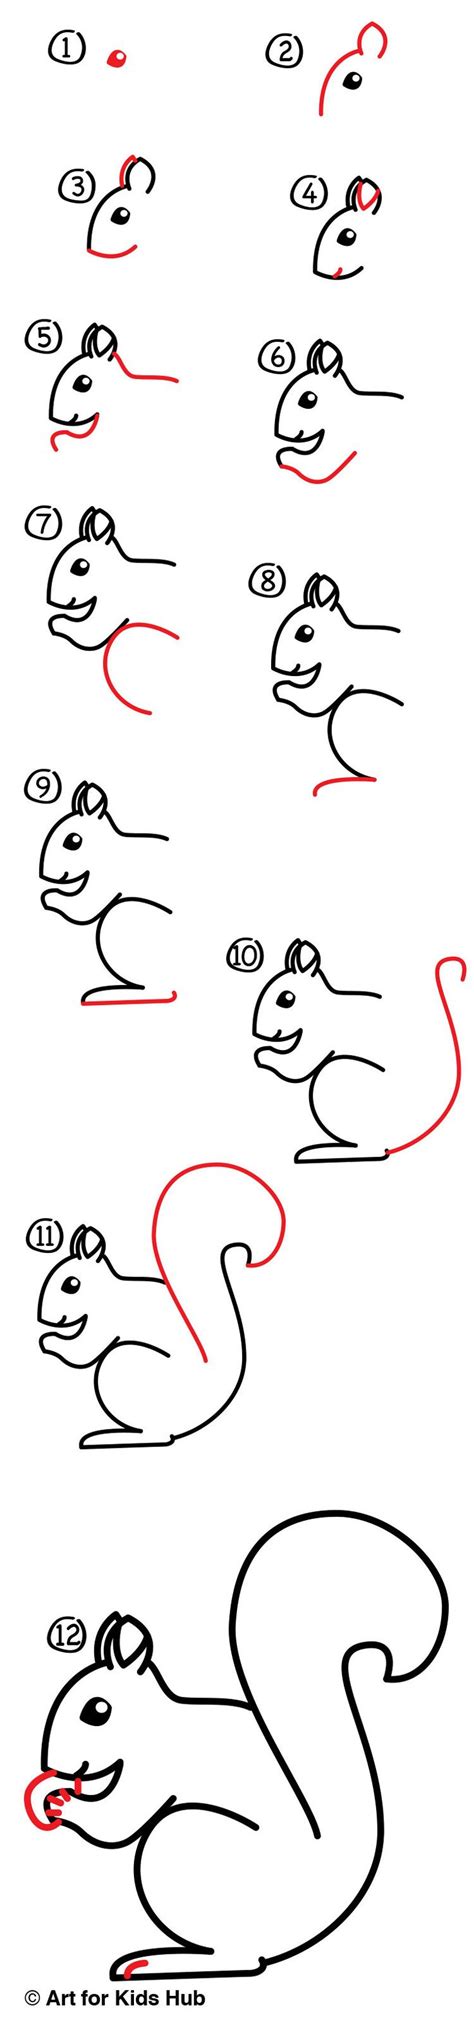 How To Draw A Squirrel Sya Art For Kids Hub How To Draw A